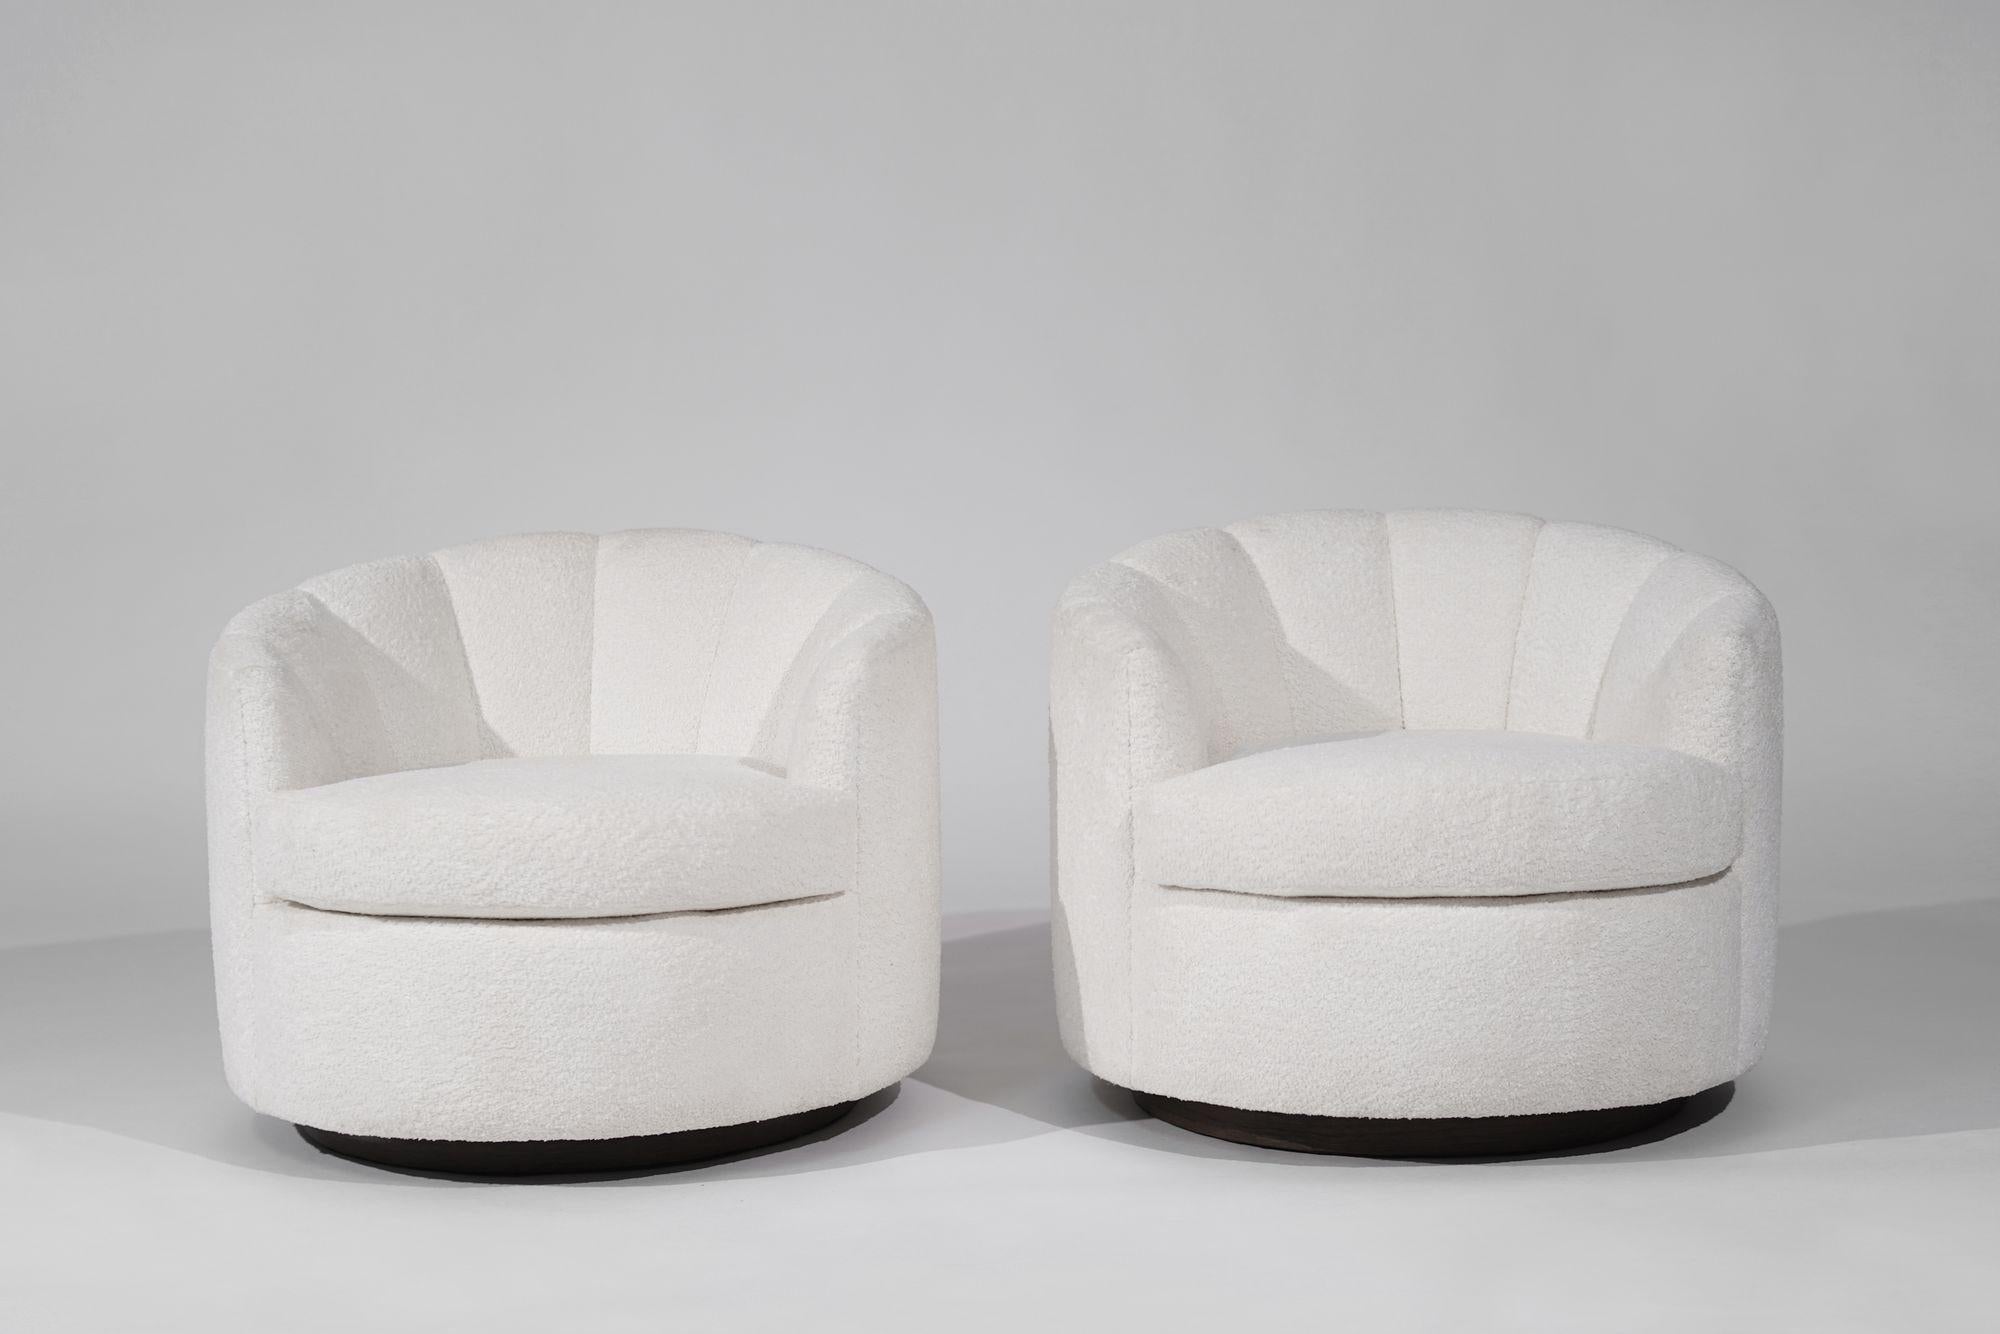 Enhance your space with this exquisite set of Mid-Century Modern swivel chairs by Directional, crafted circa 1970-1979. Meticulously restored, each chair features a new cushion and is luxuriously reupholstered in Italian bouclé, exuding timeless